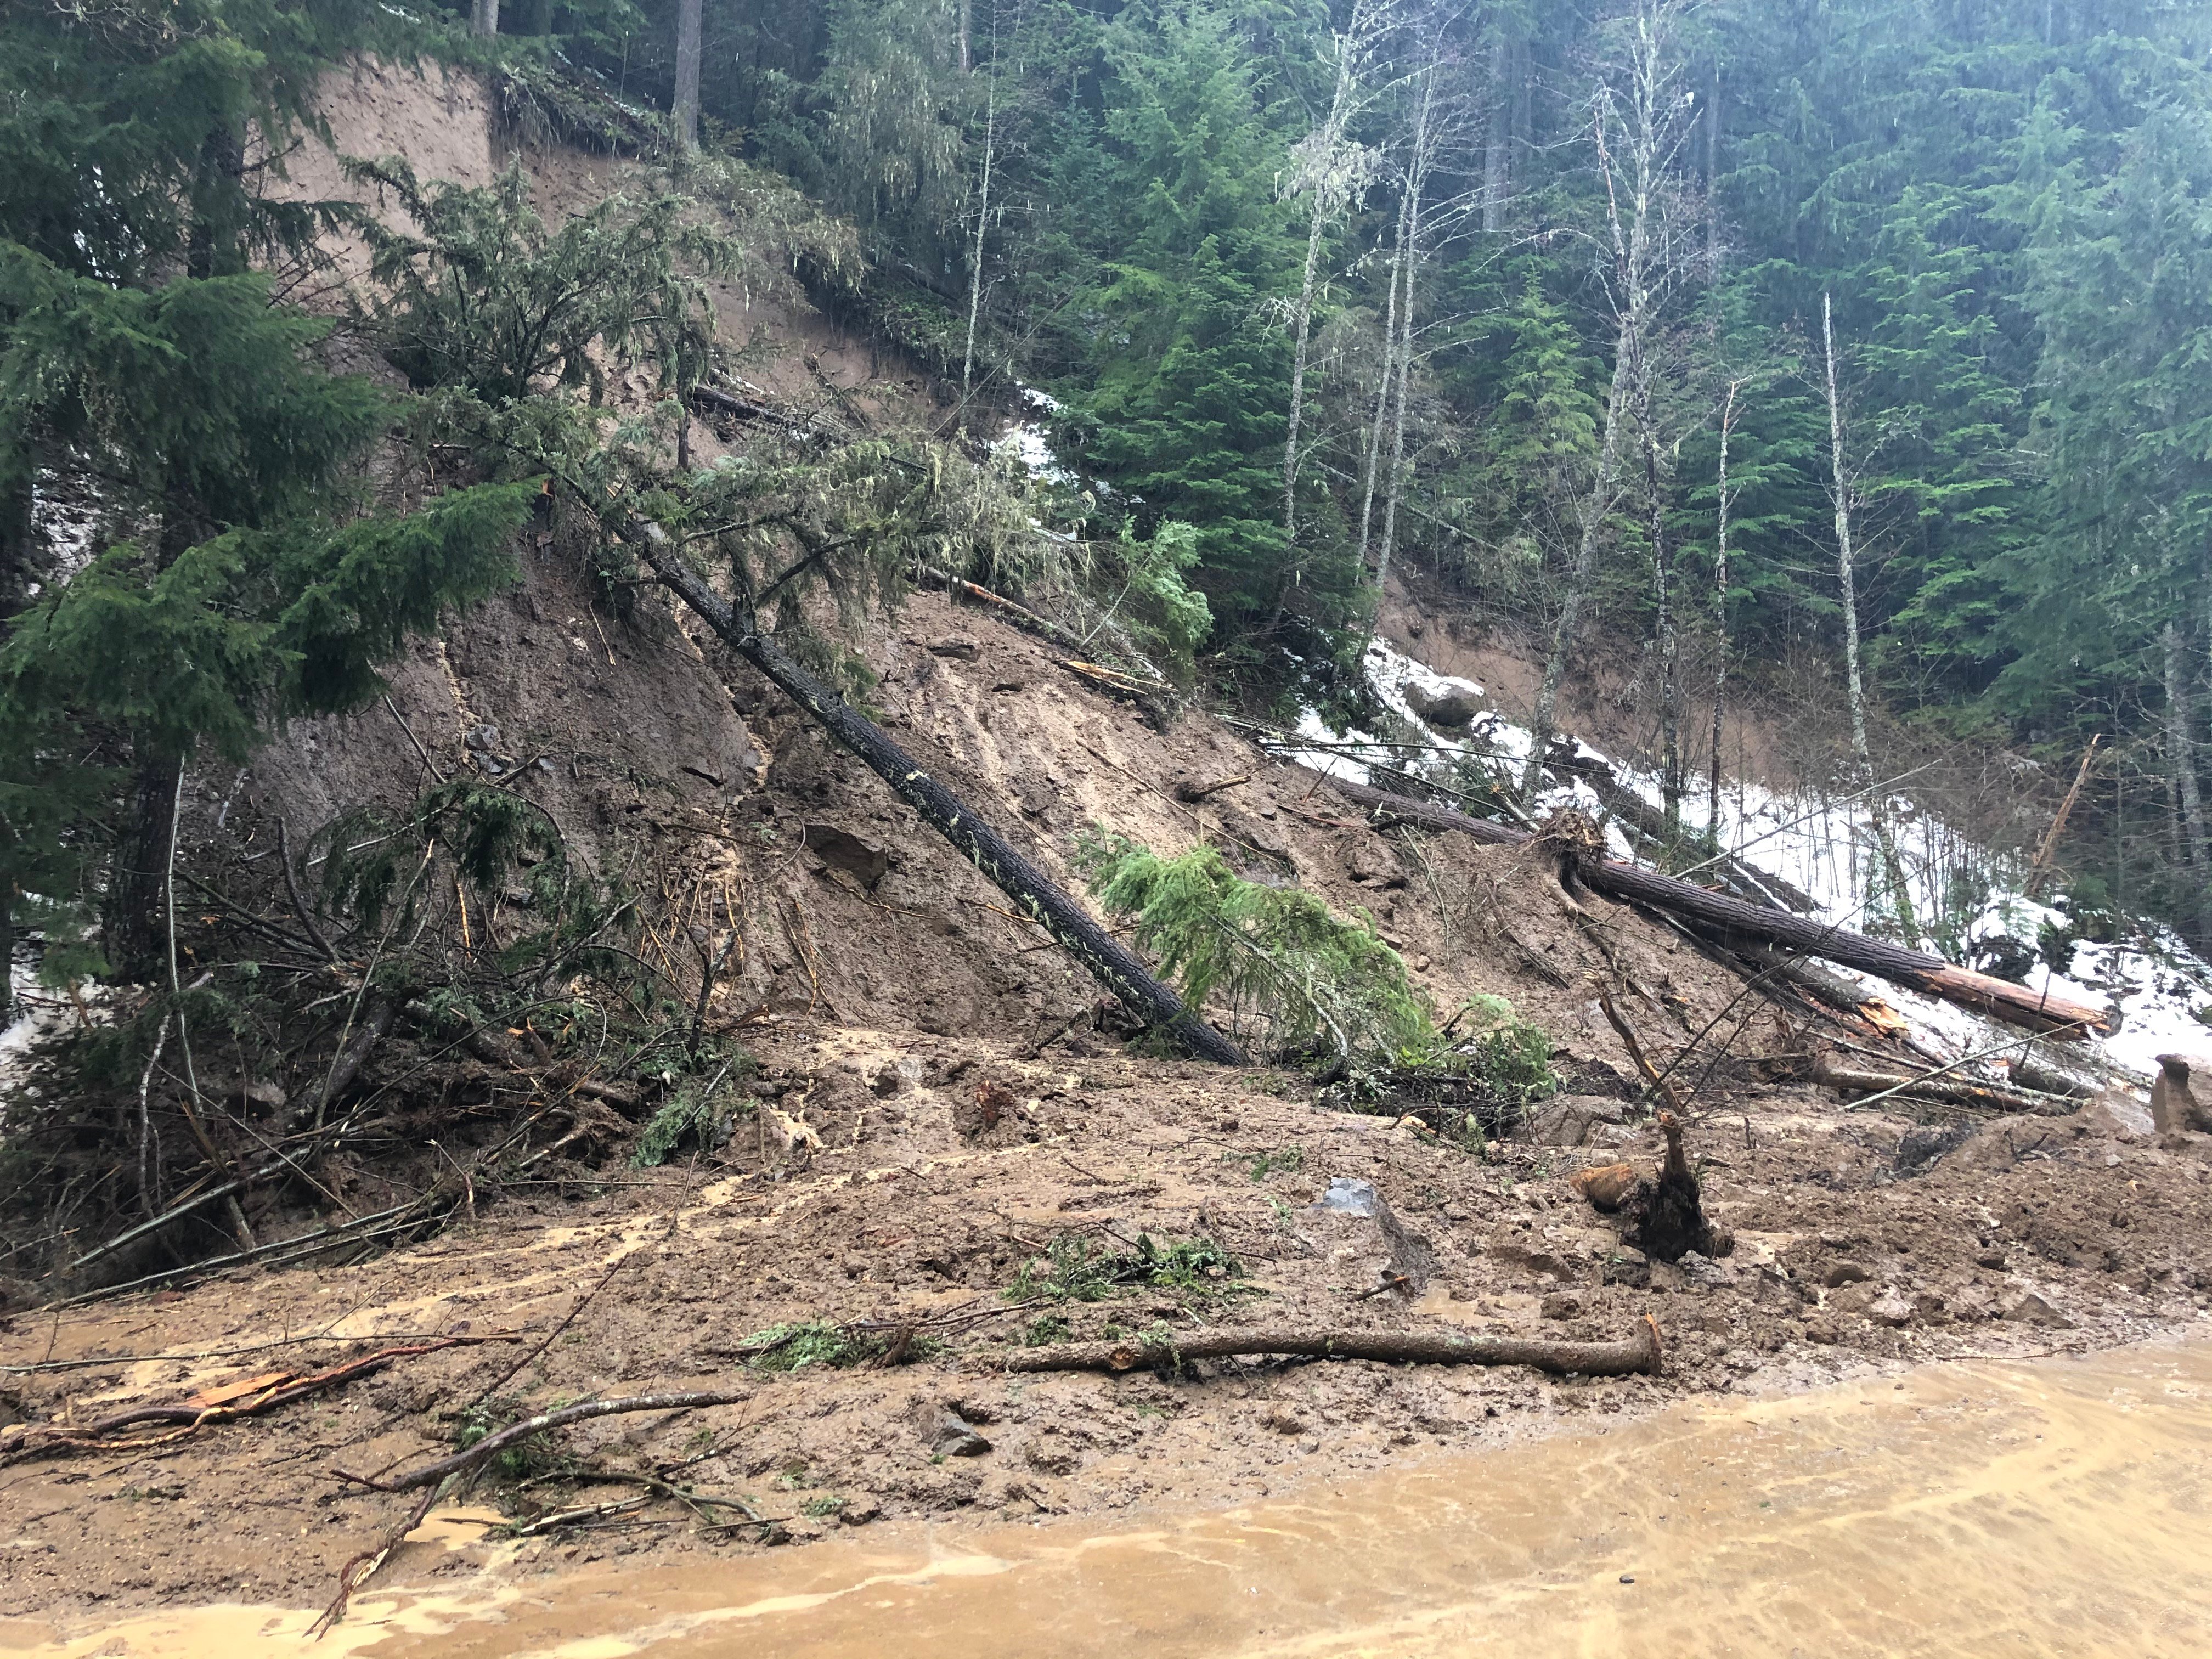 A small landslide has toppled trees and is blocking a roadway in Enumclaw. It appears to be raining with some snow still on the hillside.